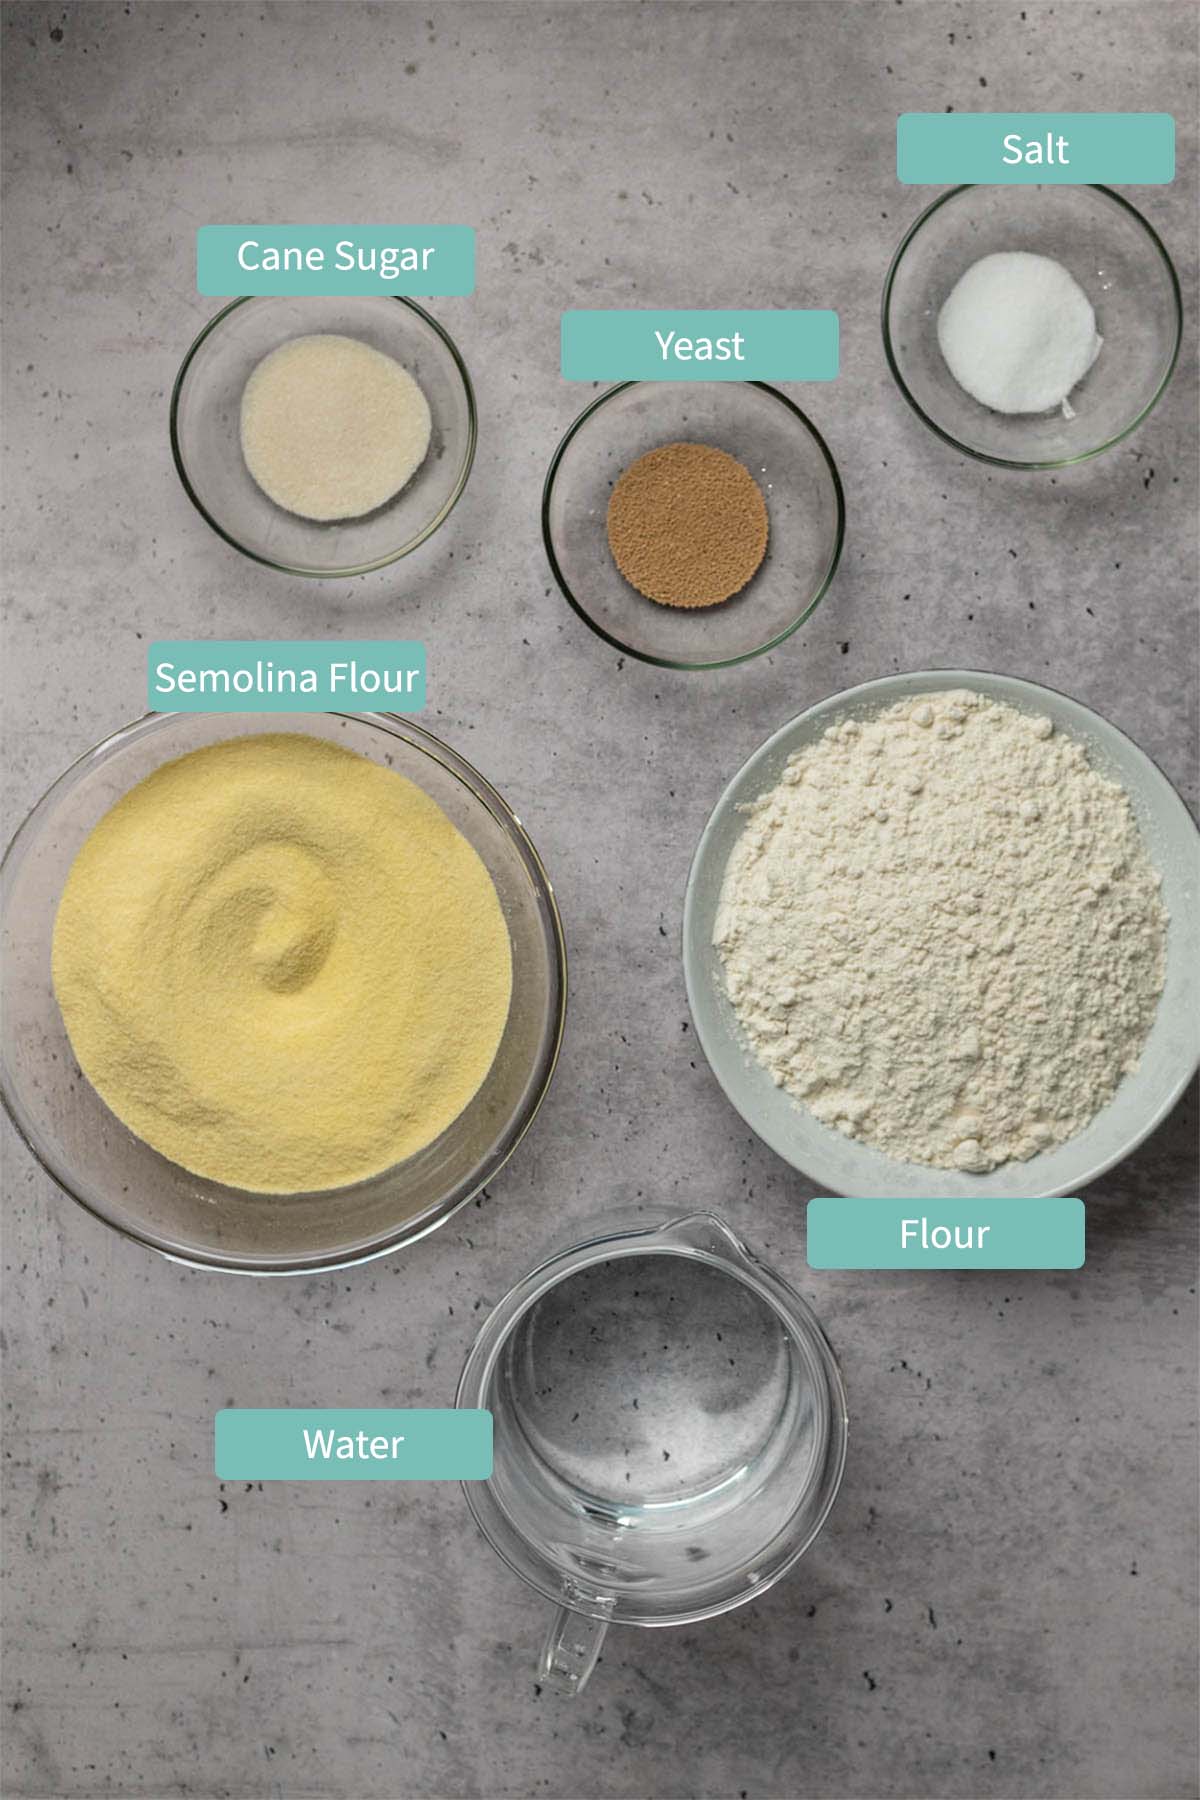 All ingredients for semolina bread as listed and described in content below.